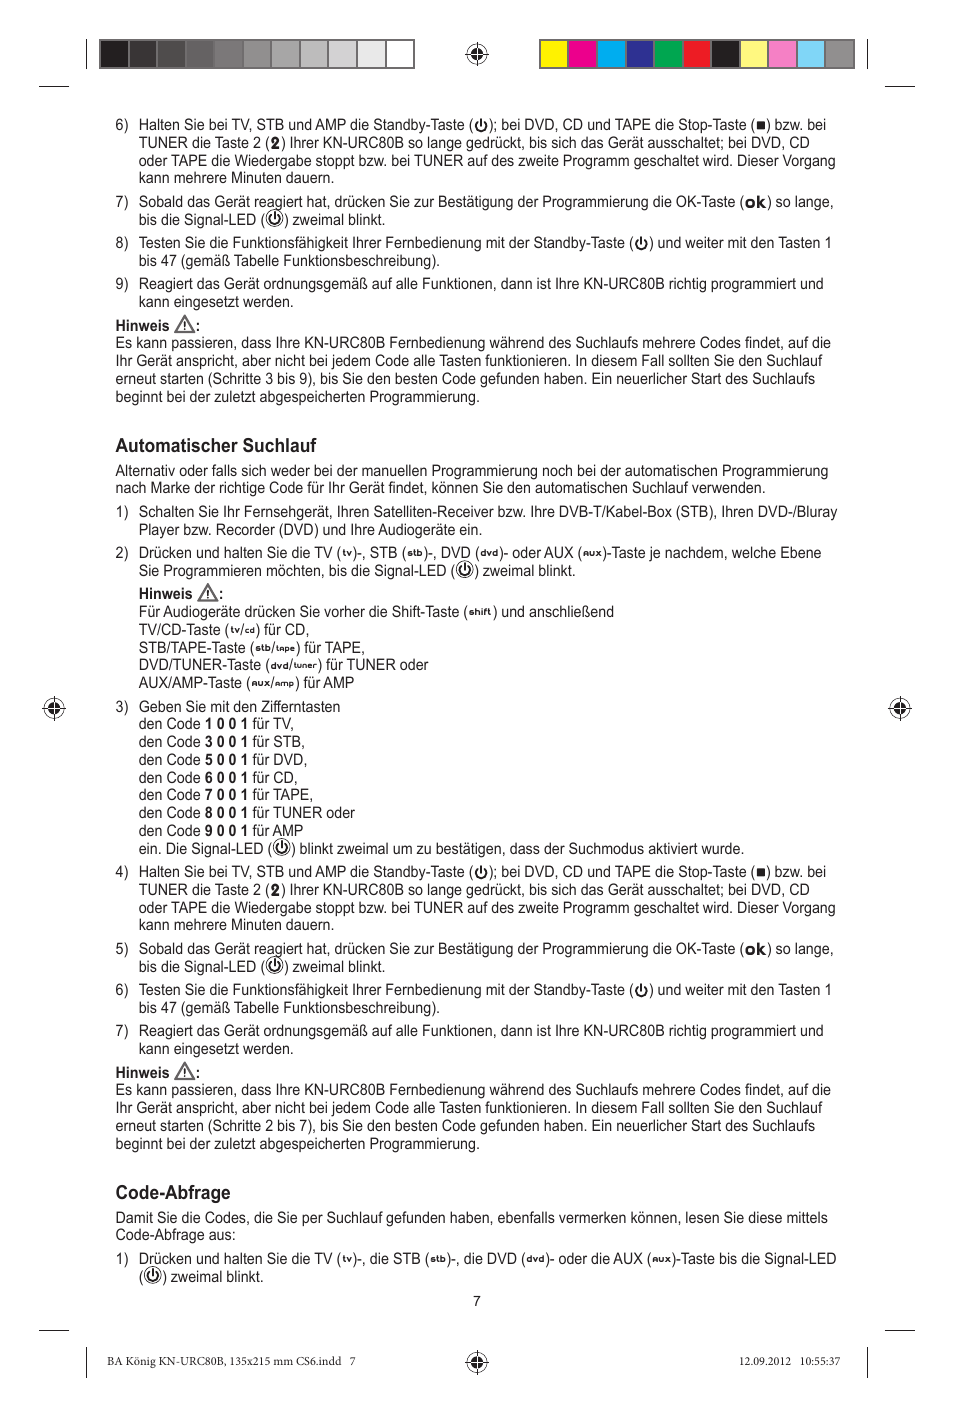 Automatischer suchlauf, Code-abfrage | Konig Electronic 8:1 universal remote  control User Manual | Page 7 / 112 | Original mode